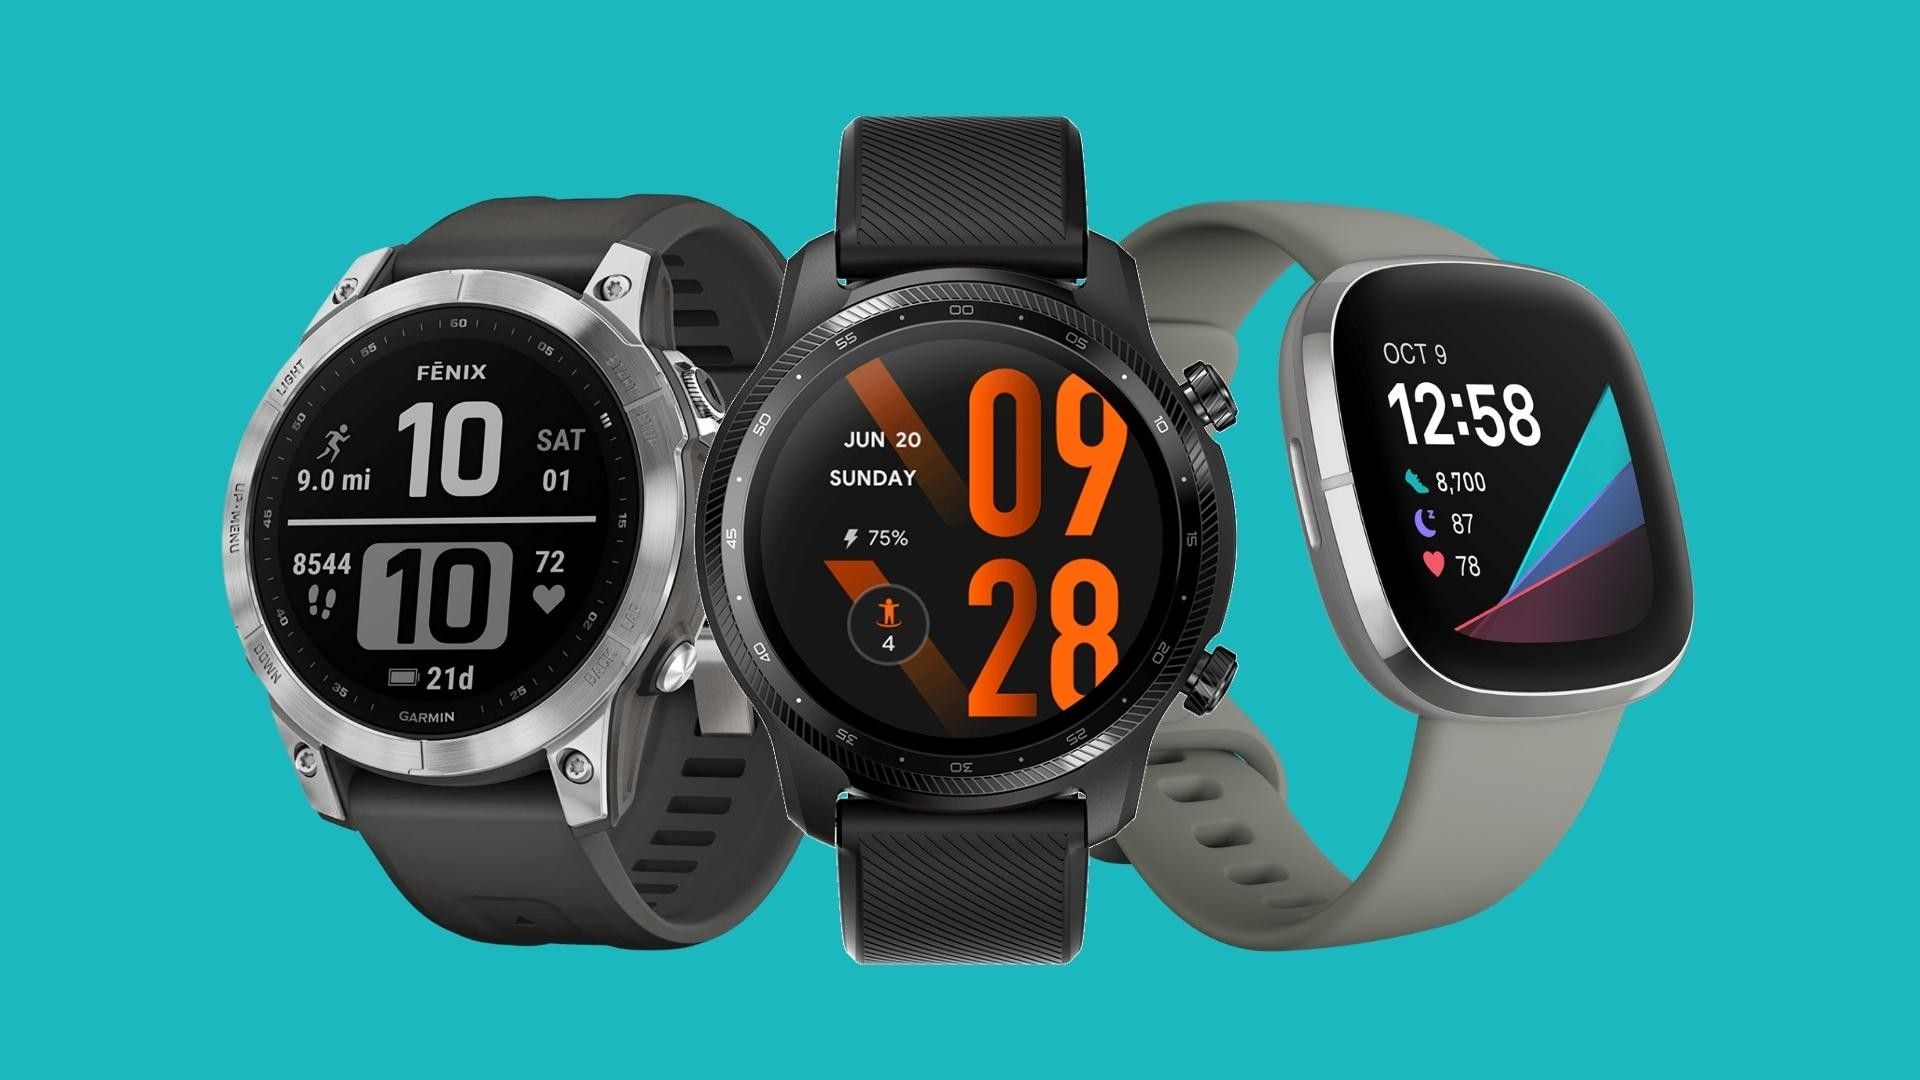 dechifrere Mount Vesuv længst Here are the best smartwatches that work with both Android and iPhone